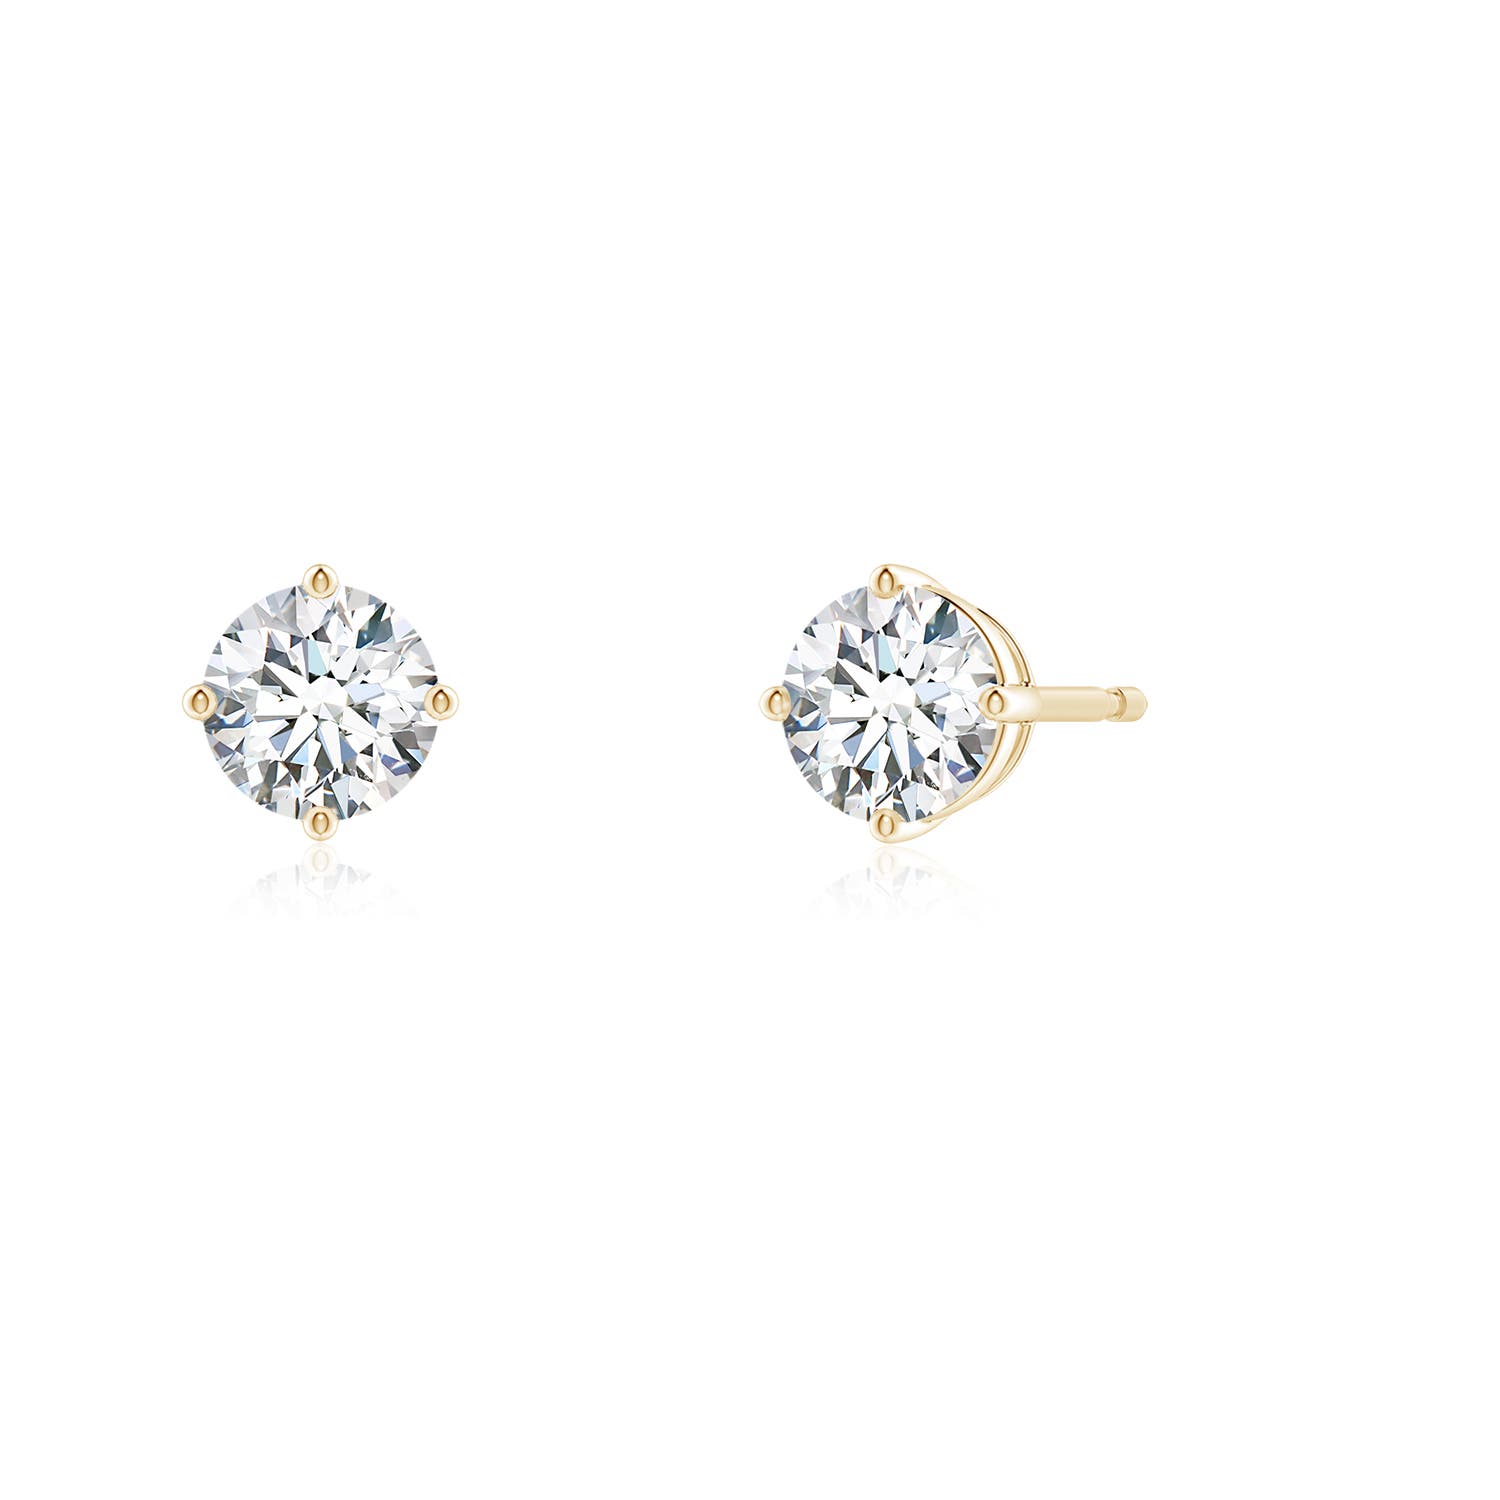 GVS2 / 1 CT / 14 KT Yellow Gold